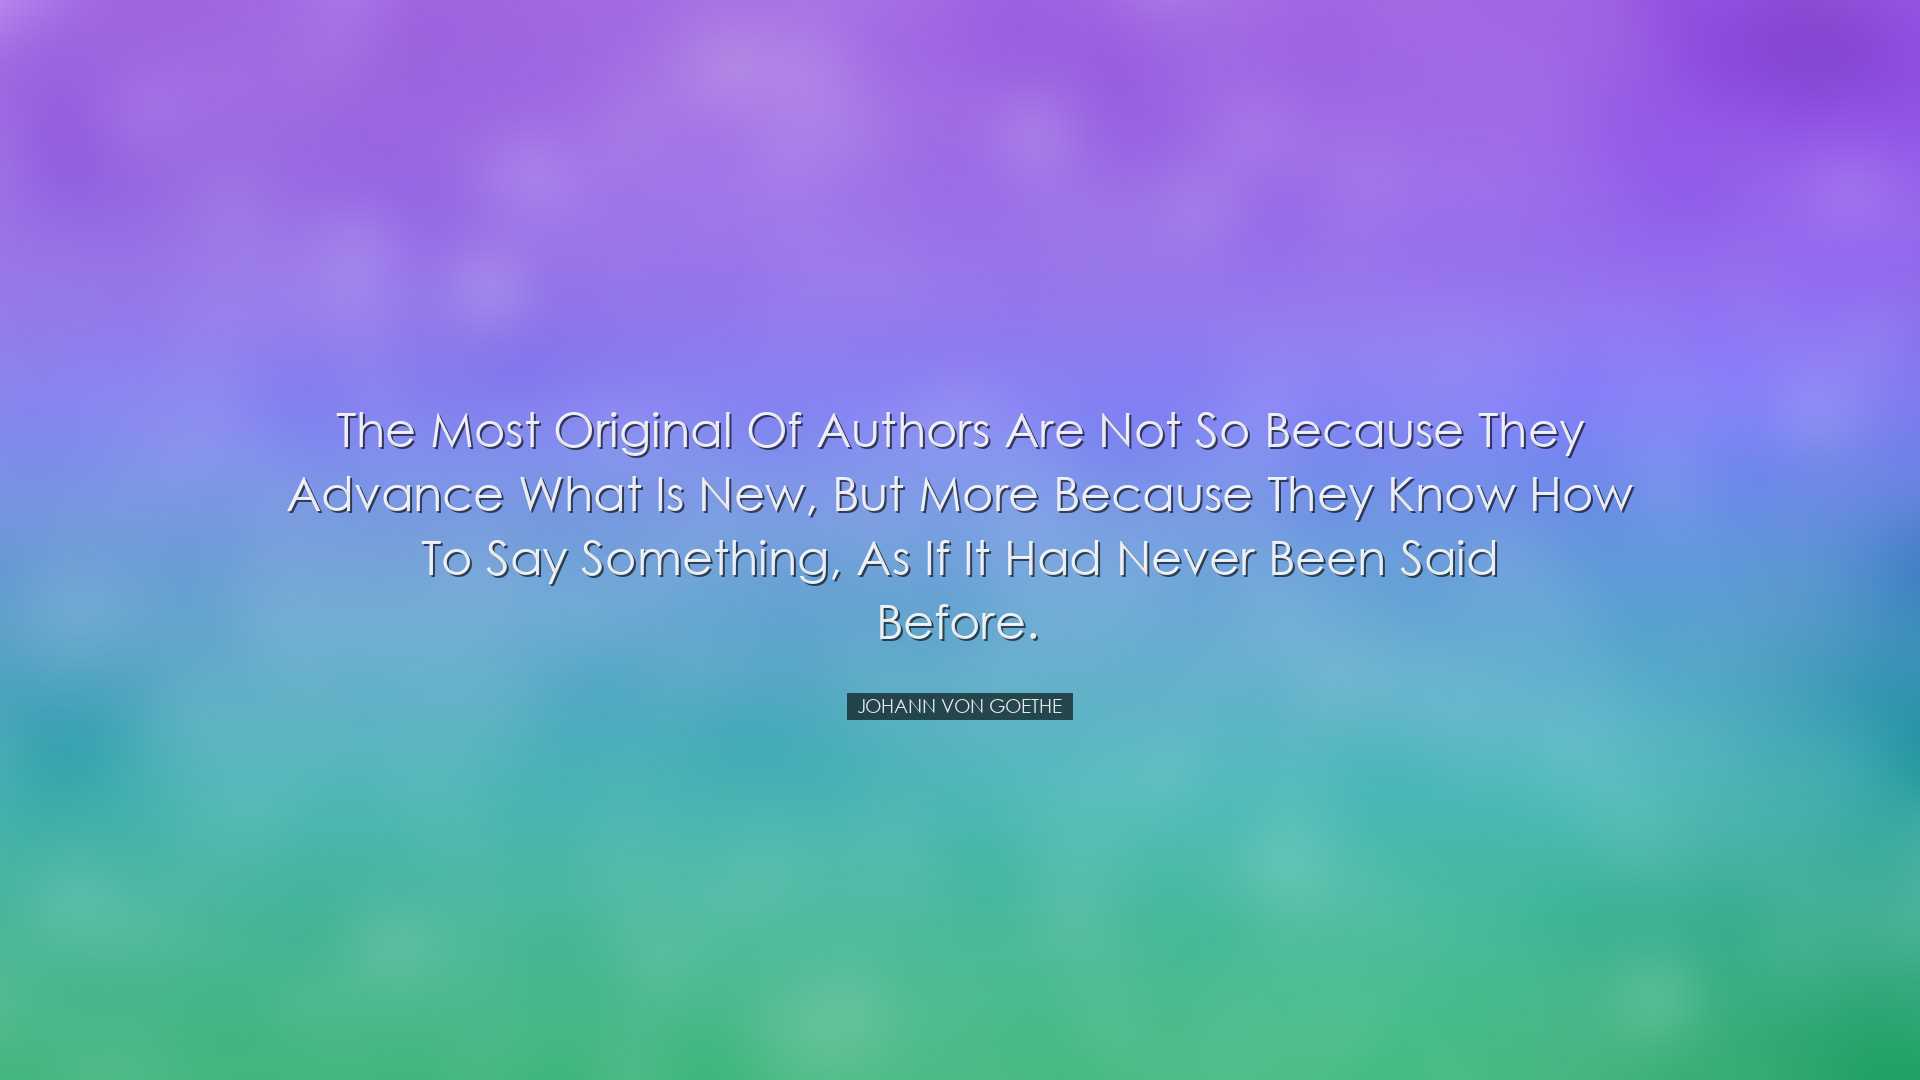 The most original of authors are not so because they advance what